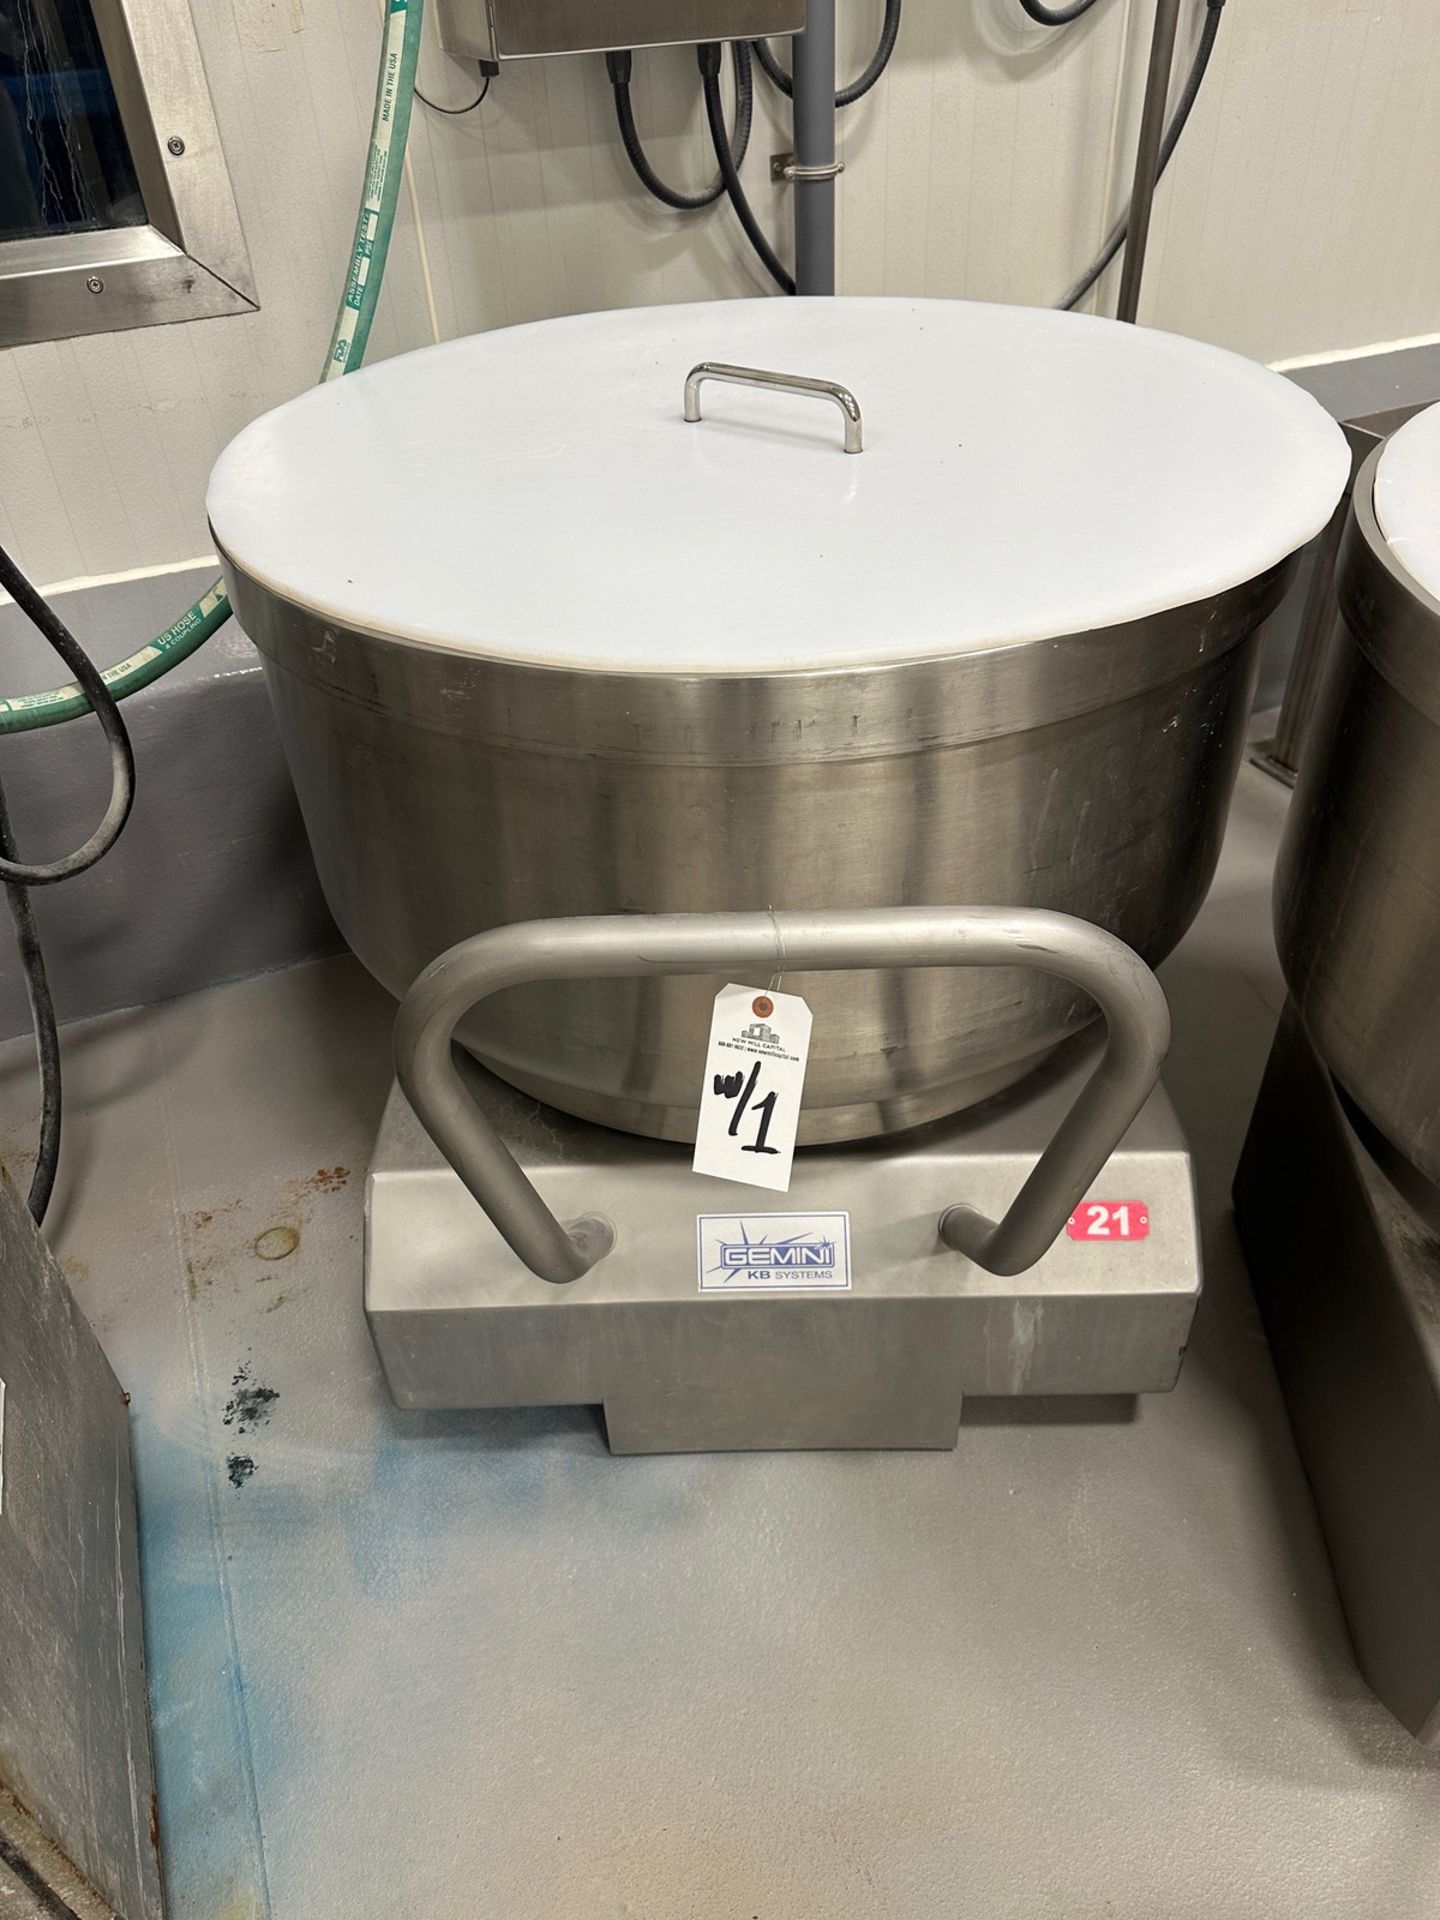 2013 Gemini Model ME 250 - 550 LB Capacity - Removable Bowl Mixer - S/N 13385 - Comes with 2 SS - Image 5 of 7